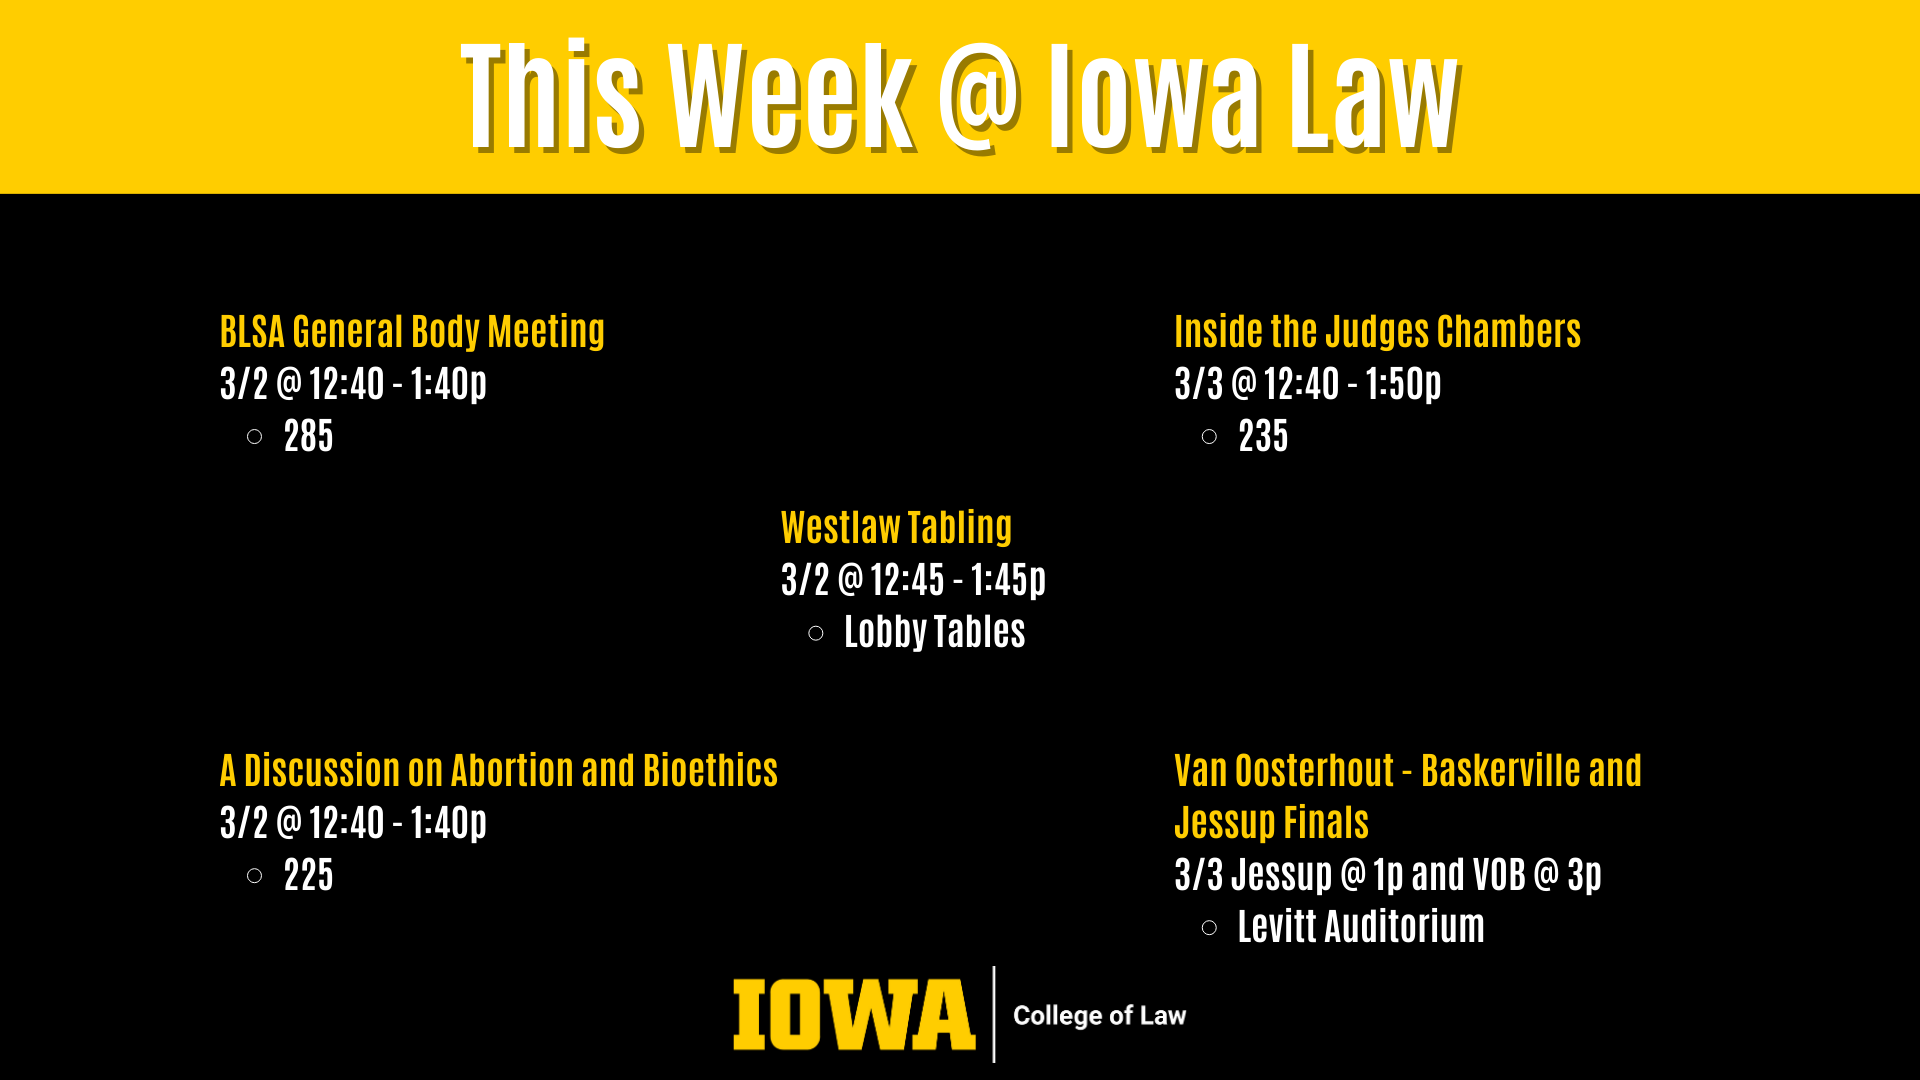 This Week @ Iowa Law Westlaw Tabling  3/2 @ 12:45 - 1:45p  Lobby Tables BLSA General Body Meeting 3/2 @ 12:40 - 1:40p  285 A Discussion on Abortion and Bioethics 3/2 @ 12:40 - 1:40p  225 Inside the Judges Chambers 3/3 @ 12:40 - 1:50p  235 Van Oosterhout - Baskerville and Jessup Finals 3/3 @ 1p Levitt Auditorium